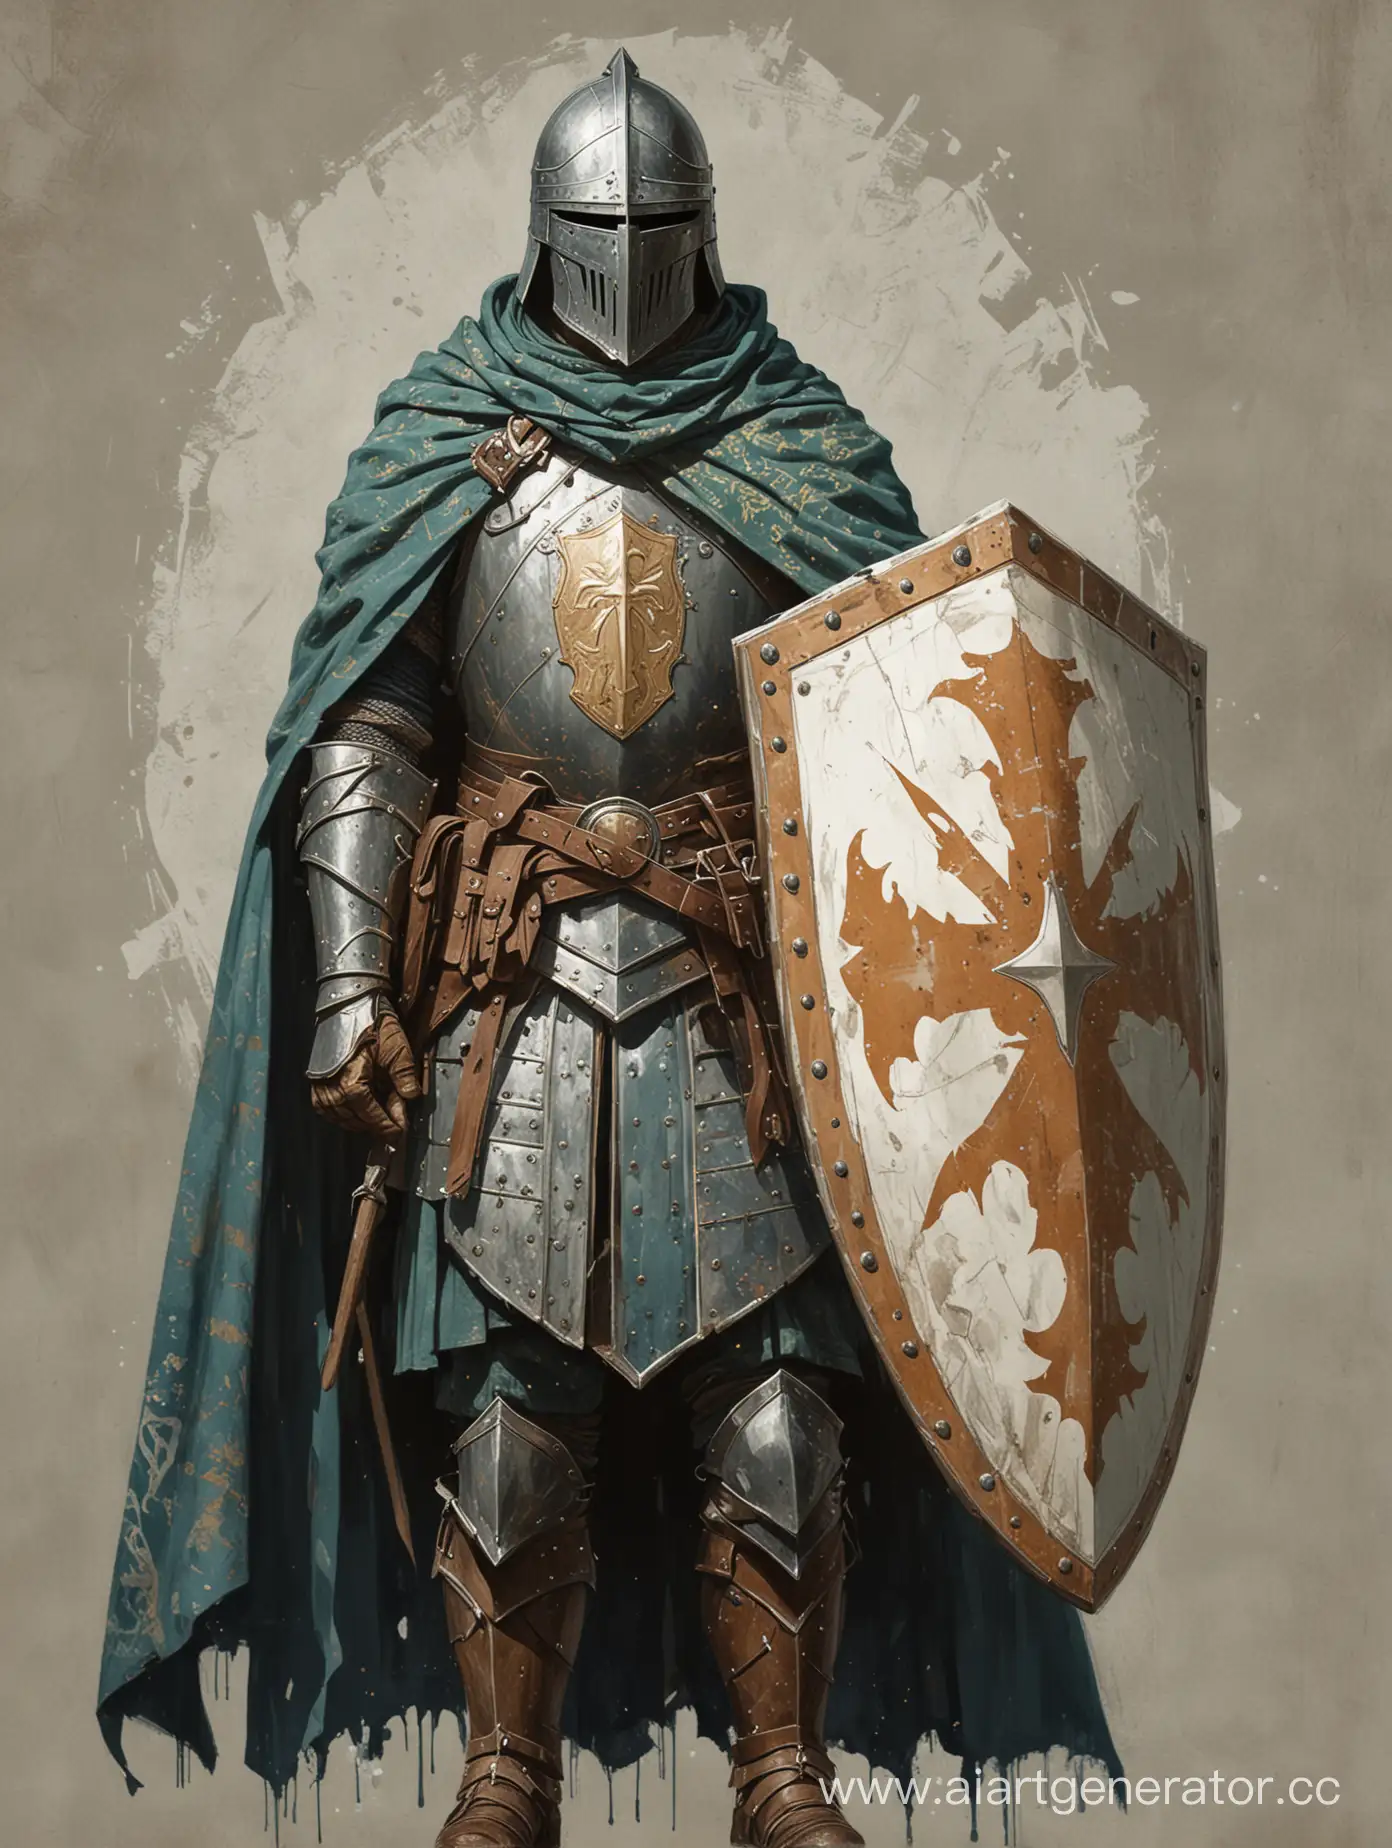 Bold-Yupik-Style-Knight-with-Shield-and-Cloak-in-Adventure-Pulp-Art